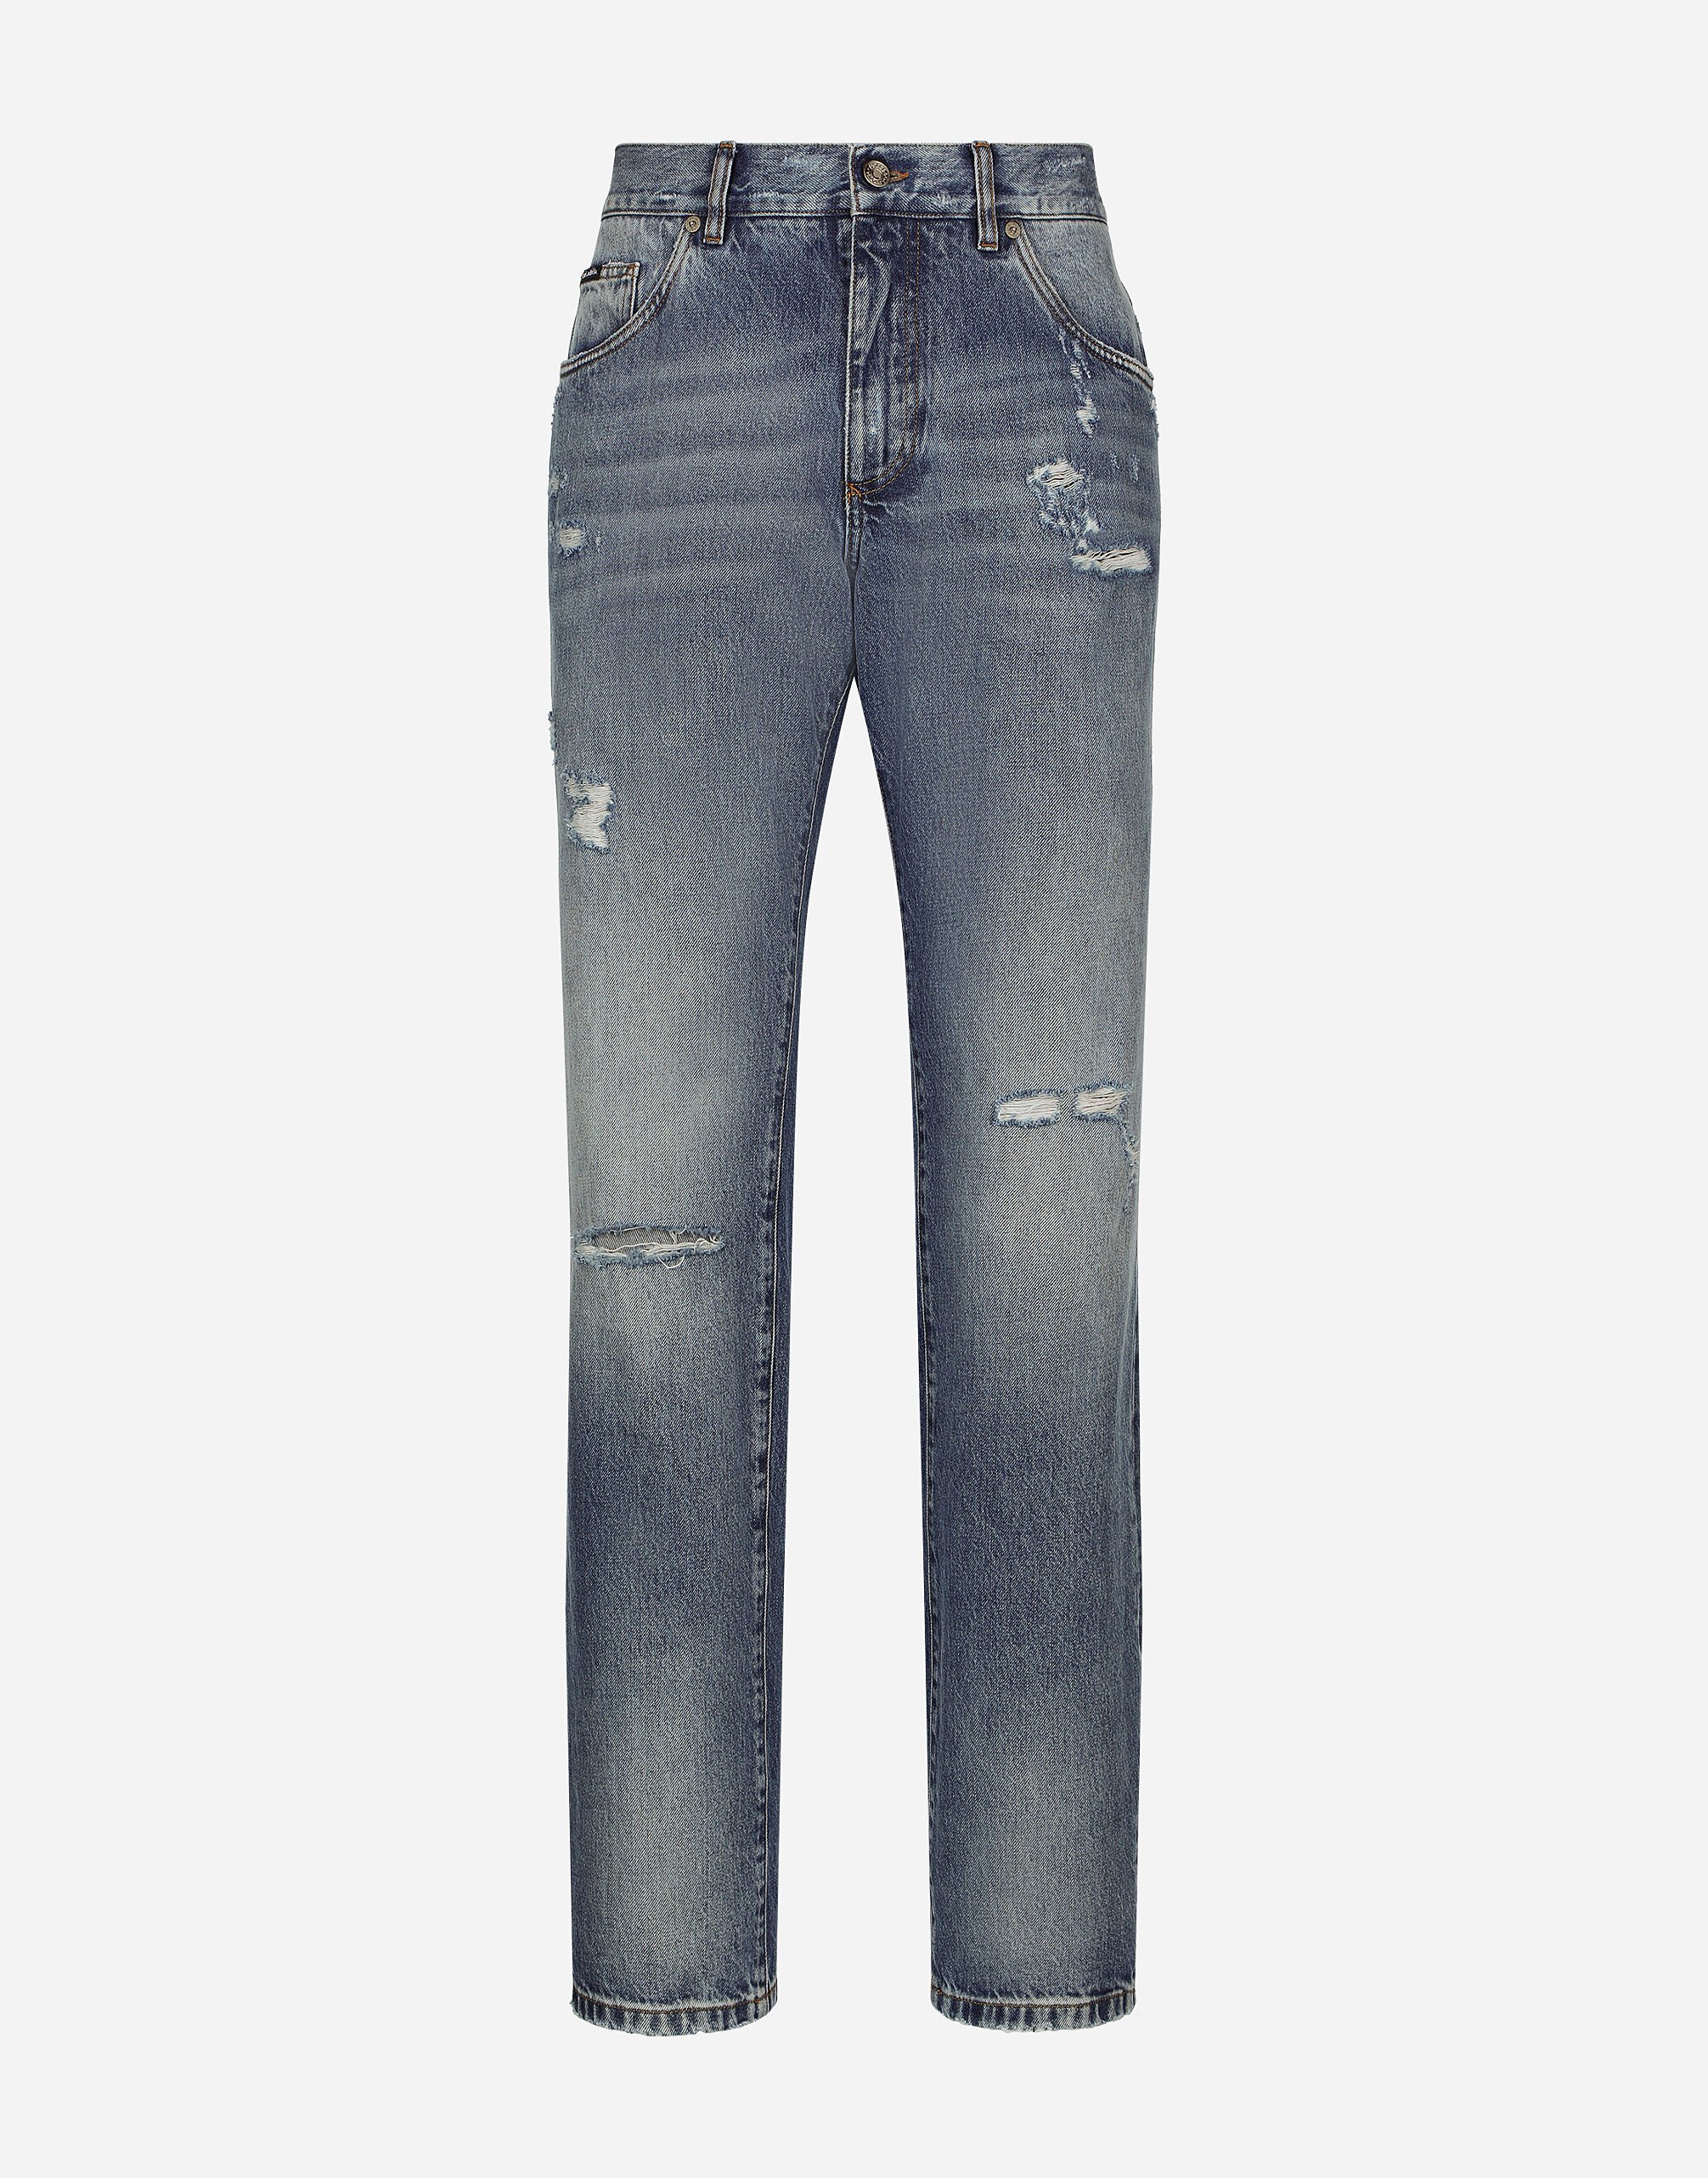 ${brand} Classic blue denim jeans with abrasions ${colorDescription} ${masterID}